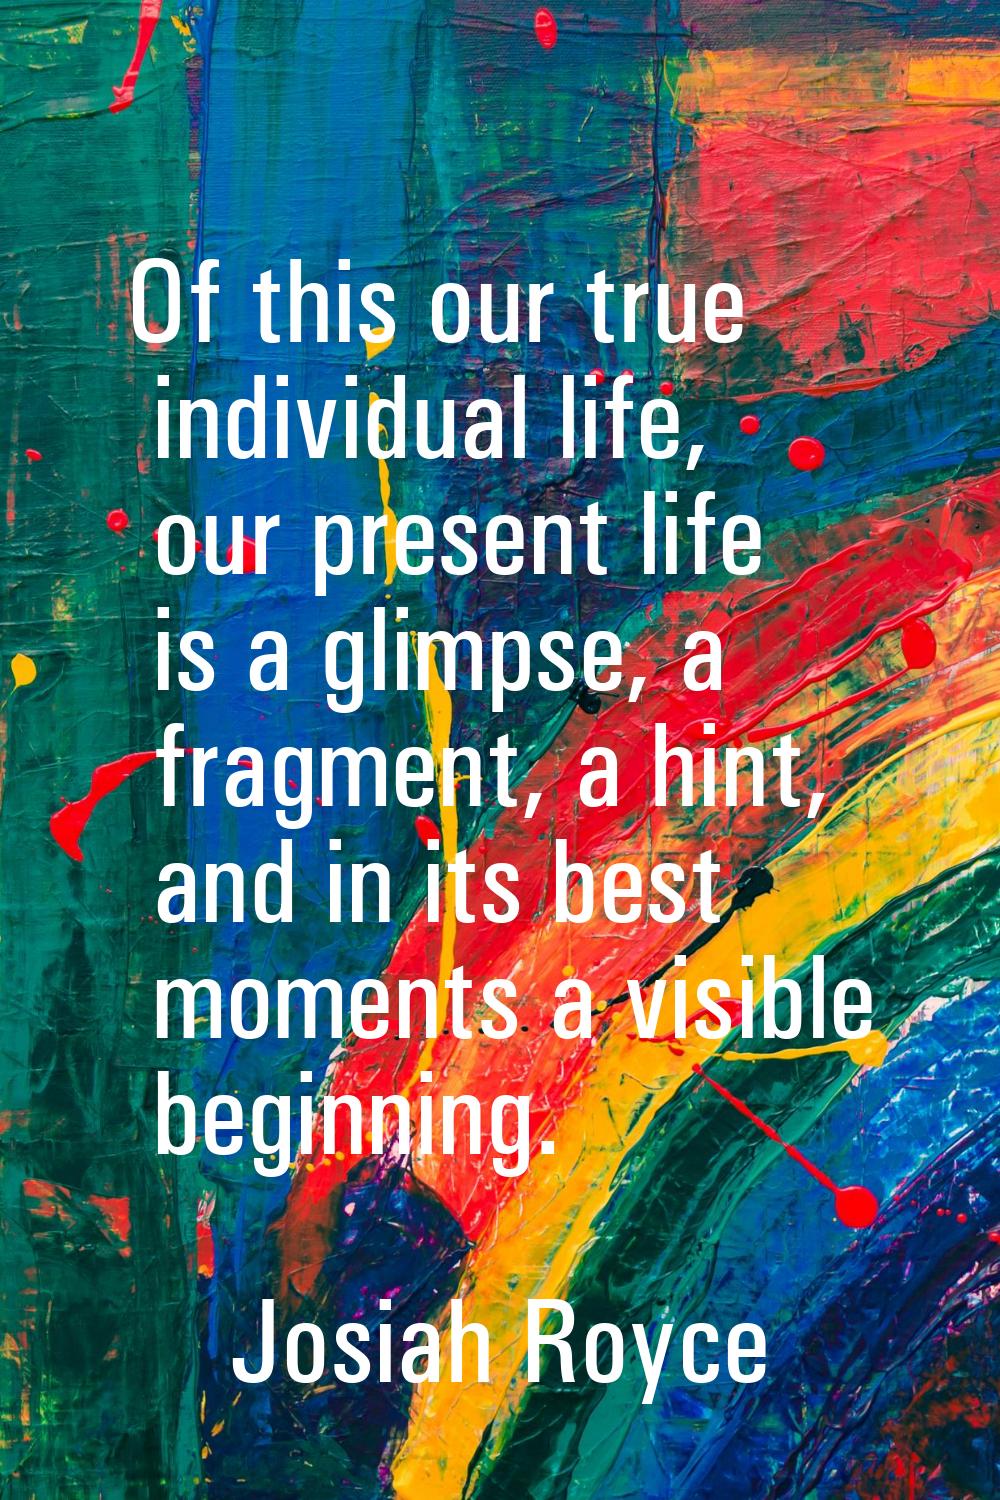 Of this our true individual life, our present life is a glimpse, a fragment, a hint, and in its bes